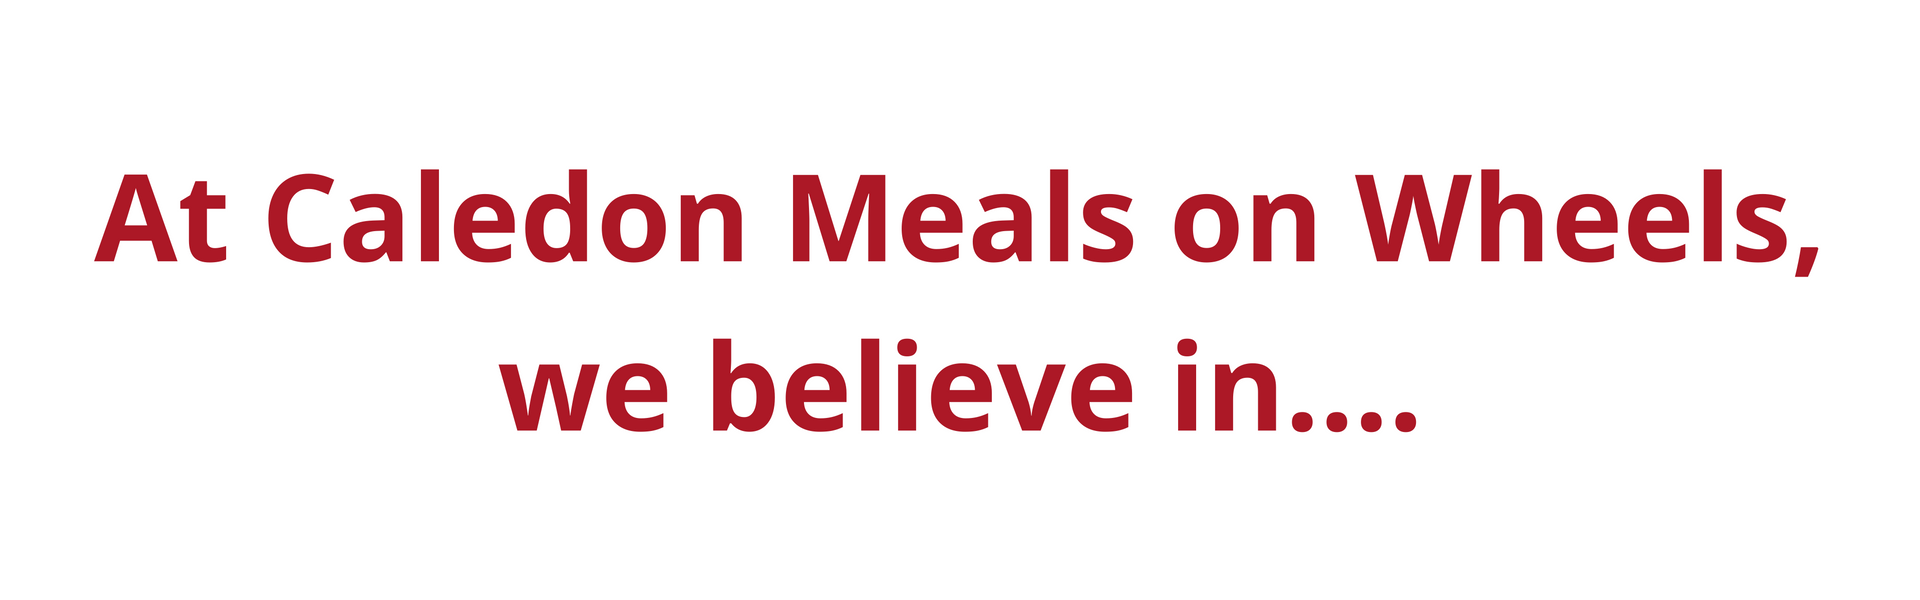 At Caledon Meals on Wheels, we believe in.... copy.png